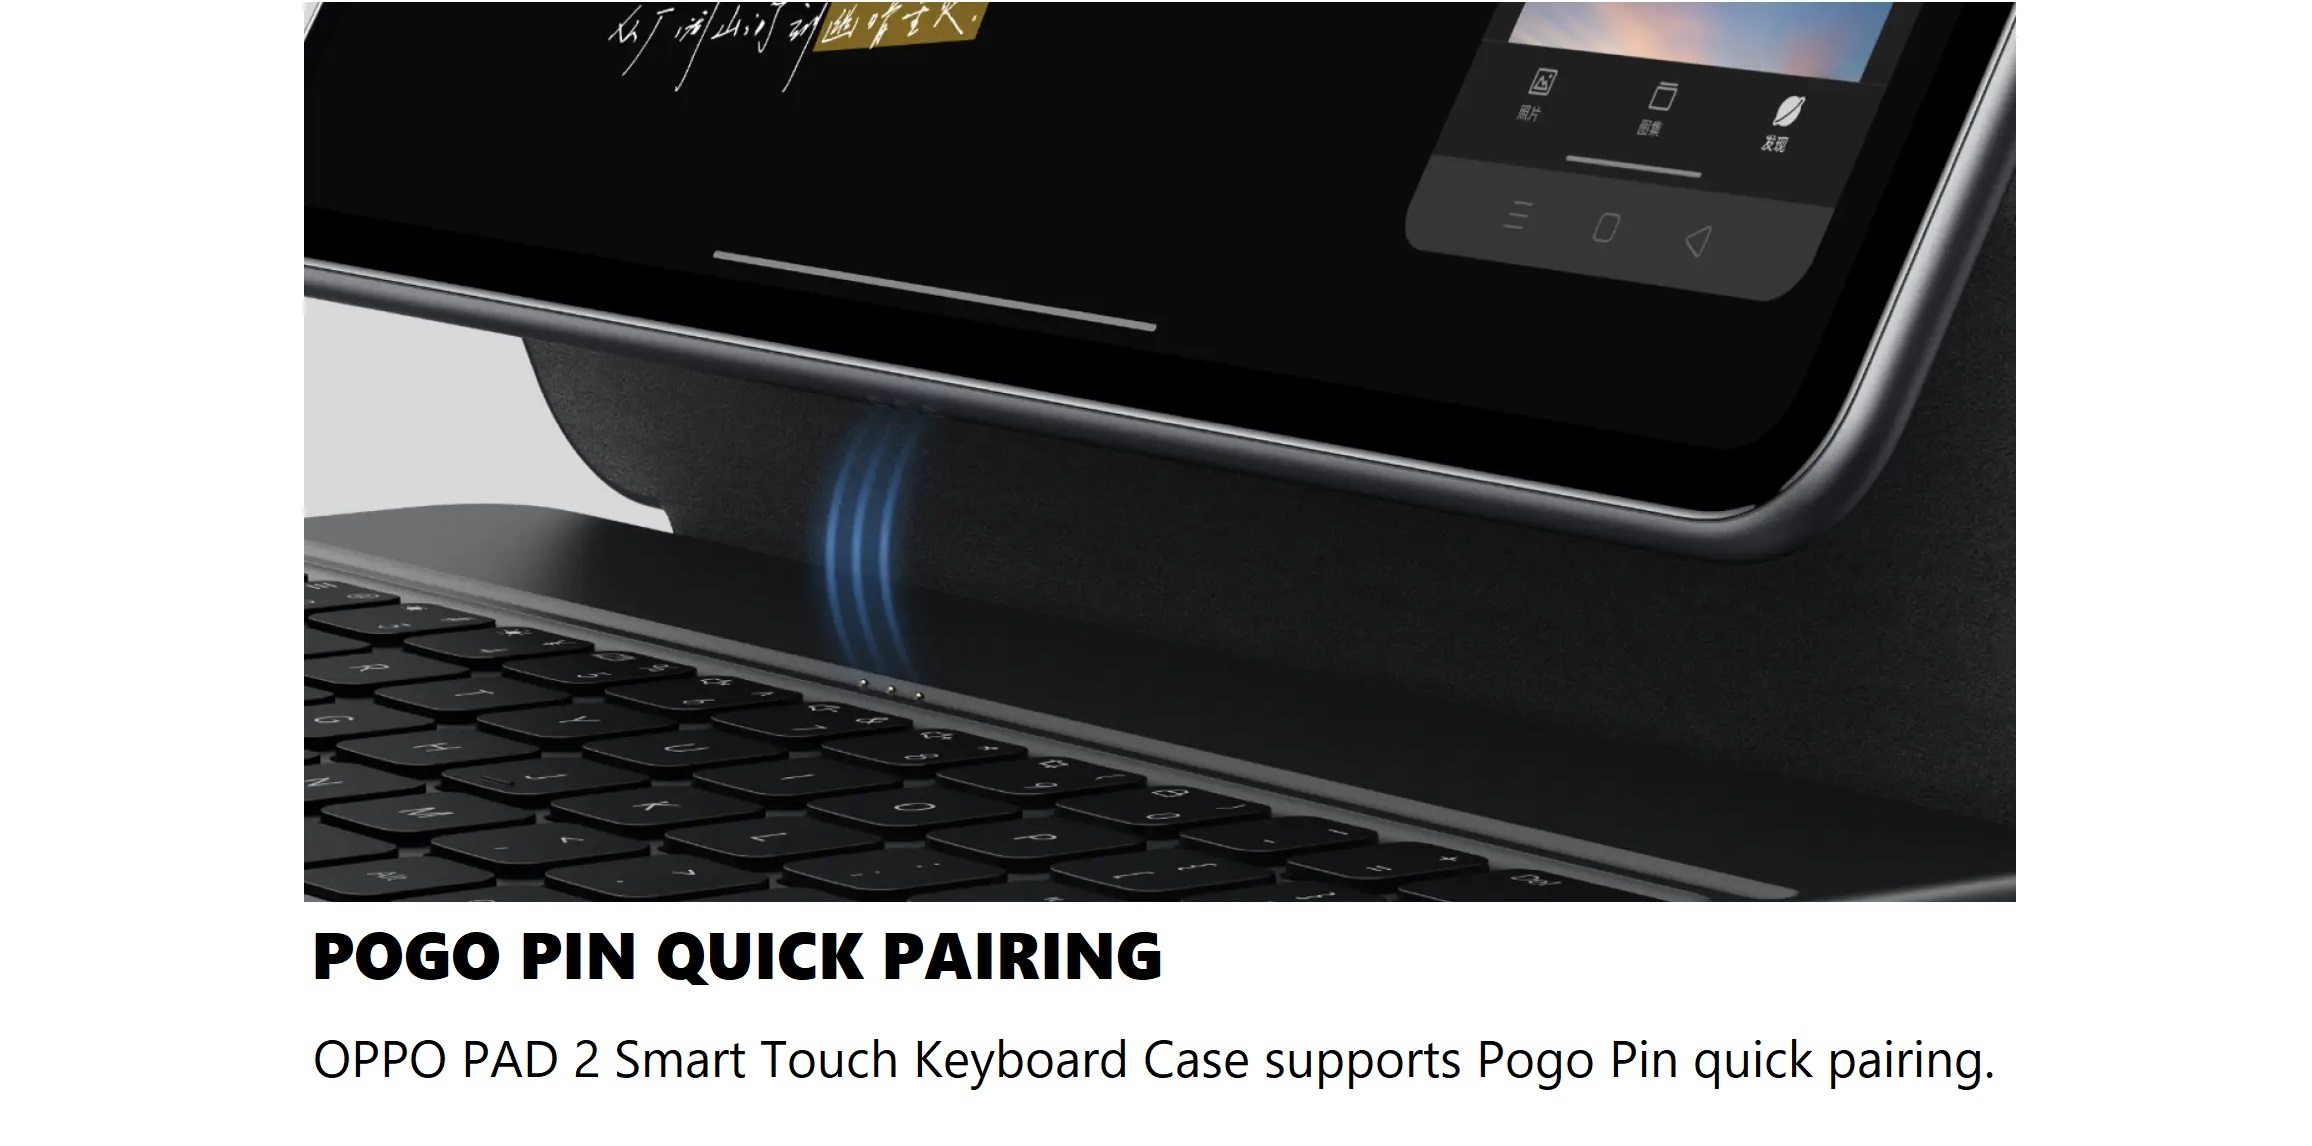 OPPO Pad 2 Smart Touch Keyboard Case